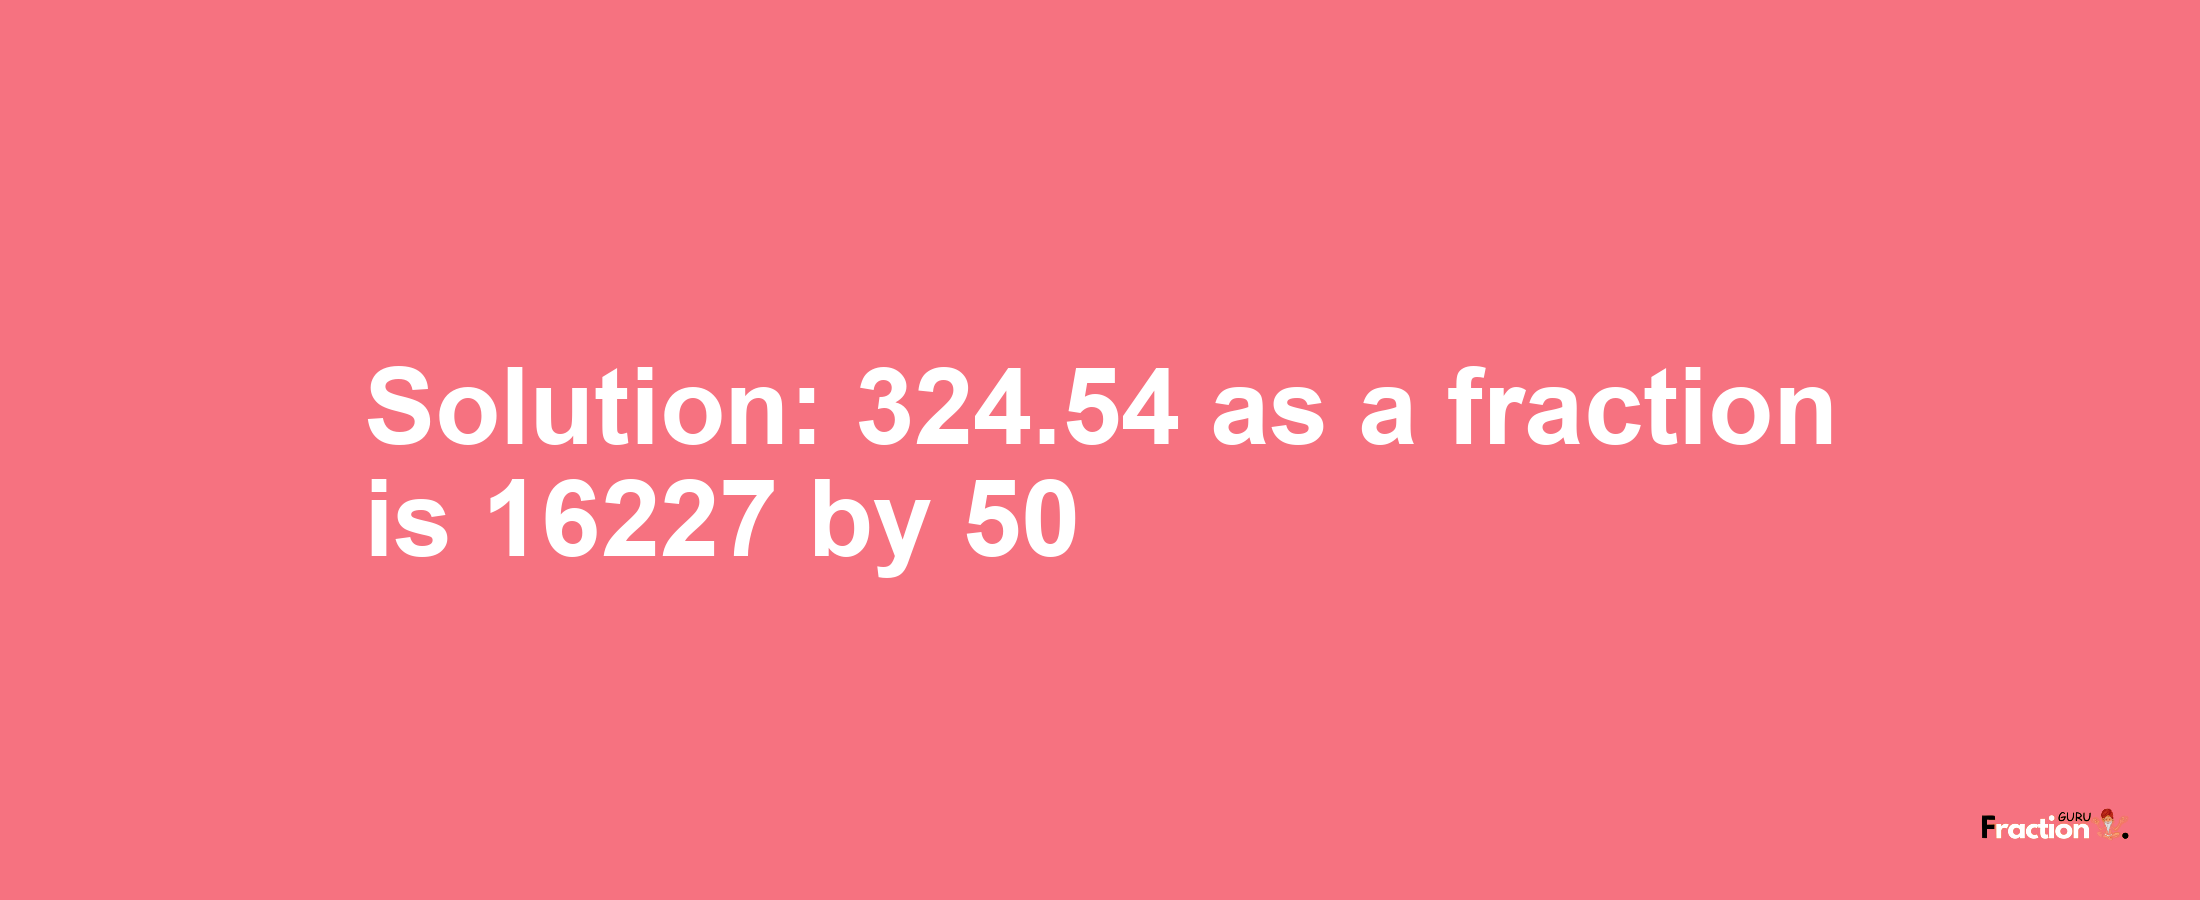 Solution:324.54 as a fraction is 16227/50